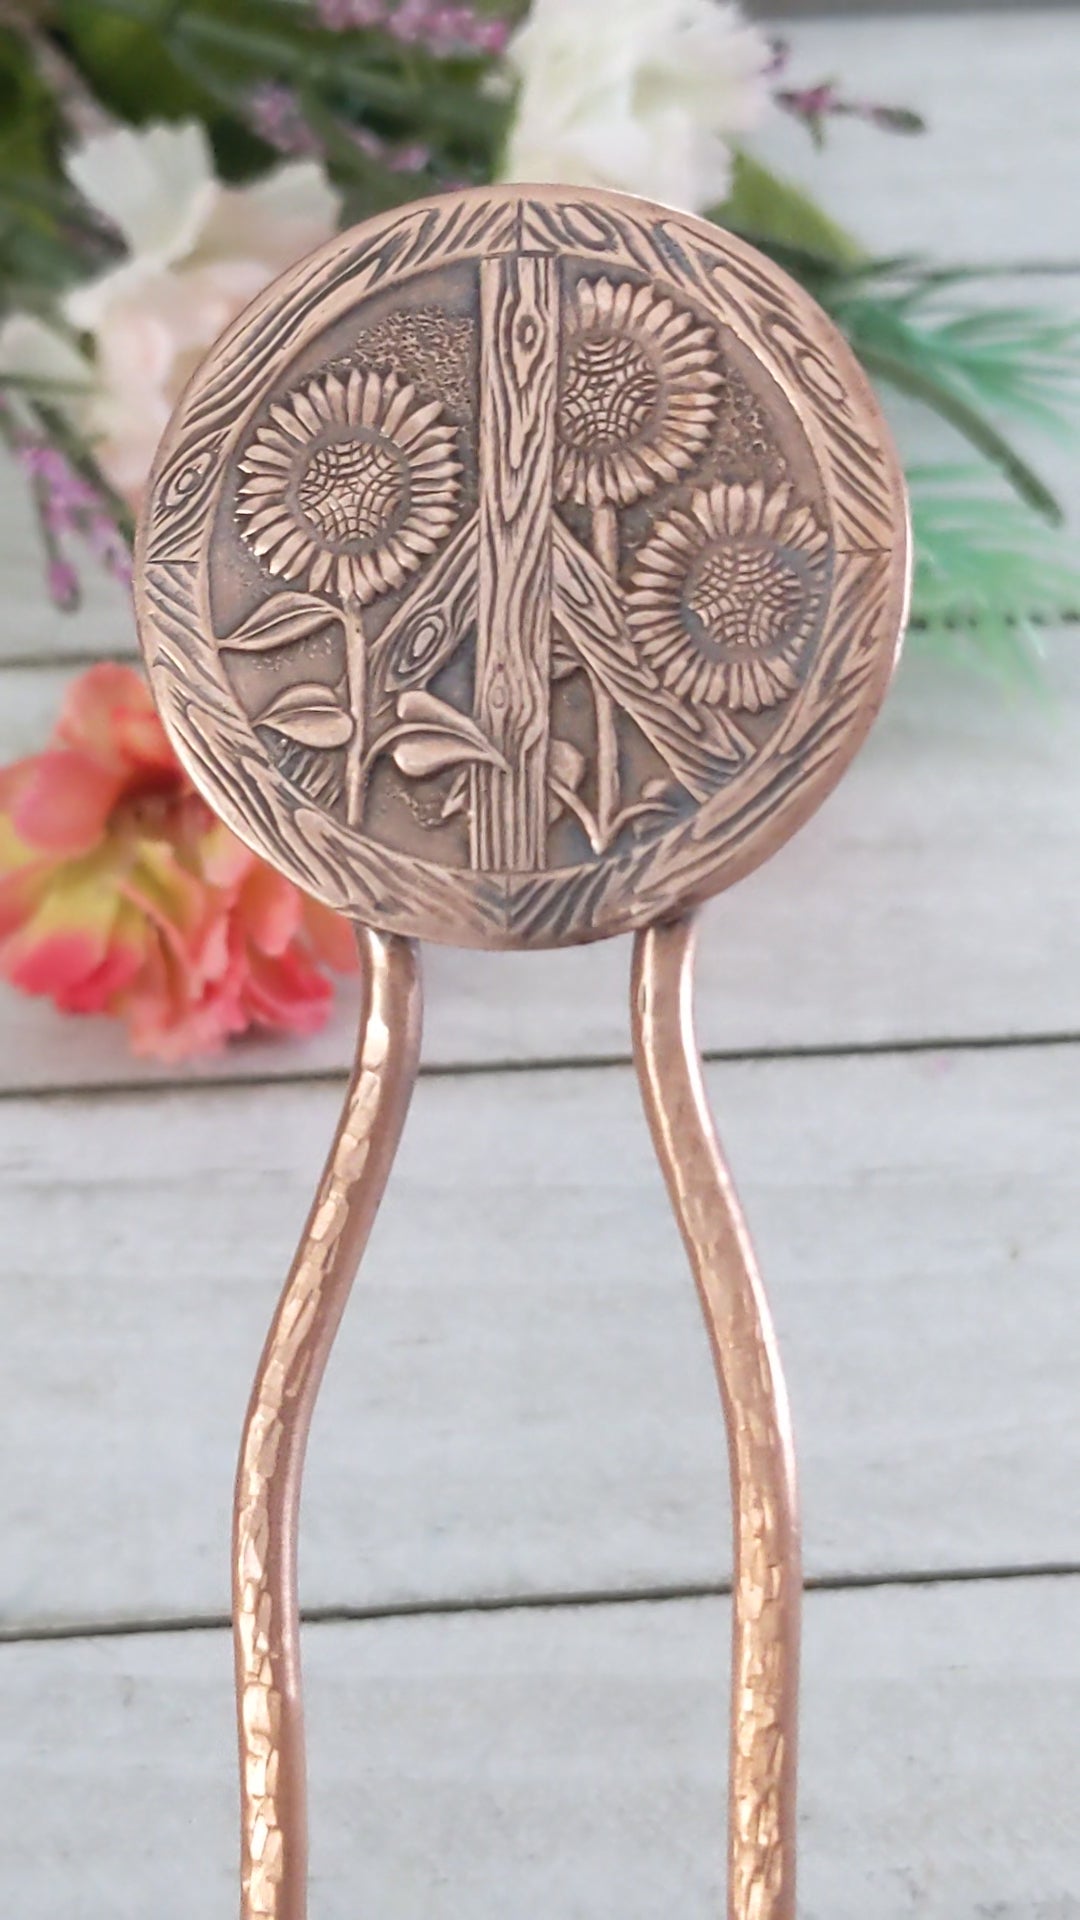 Video of Copper hair fork with a large round design at top of sunflowers and a peace sign. The peace sign has a wood texture. Three sunflowers grow through the wood sign. There's a lot of detail - veins on the leaves, you can see the sunflower seeds and petals. On a copper fork with a hammered finish.